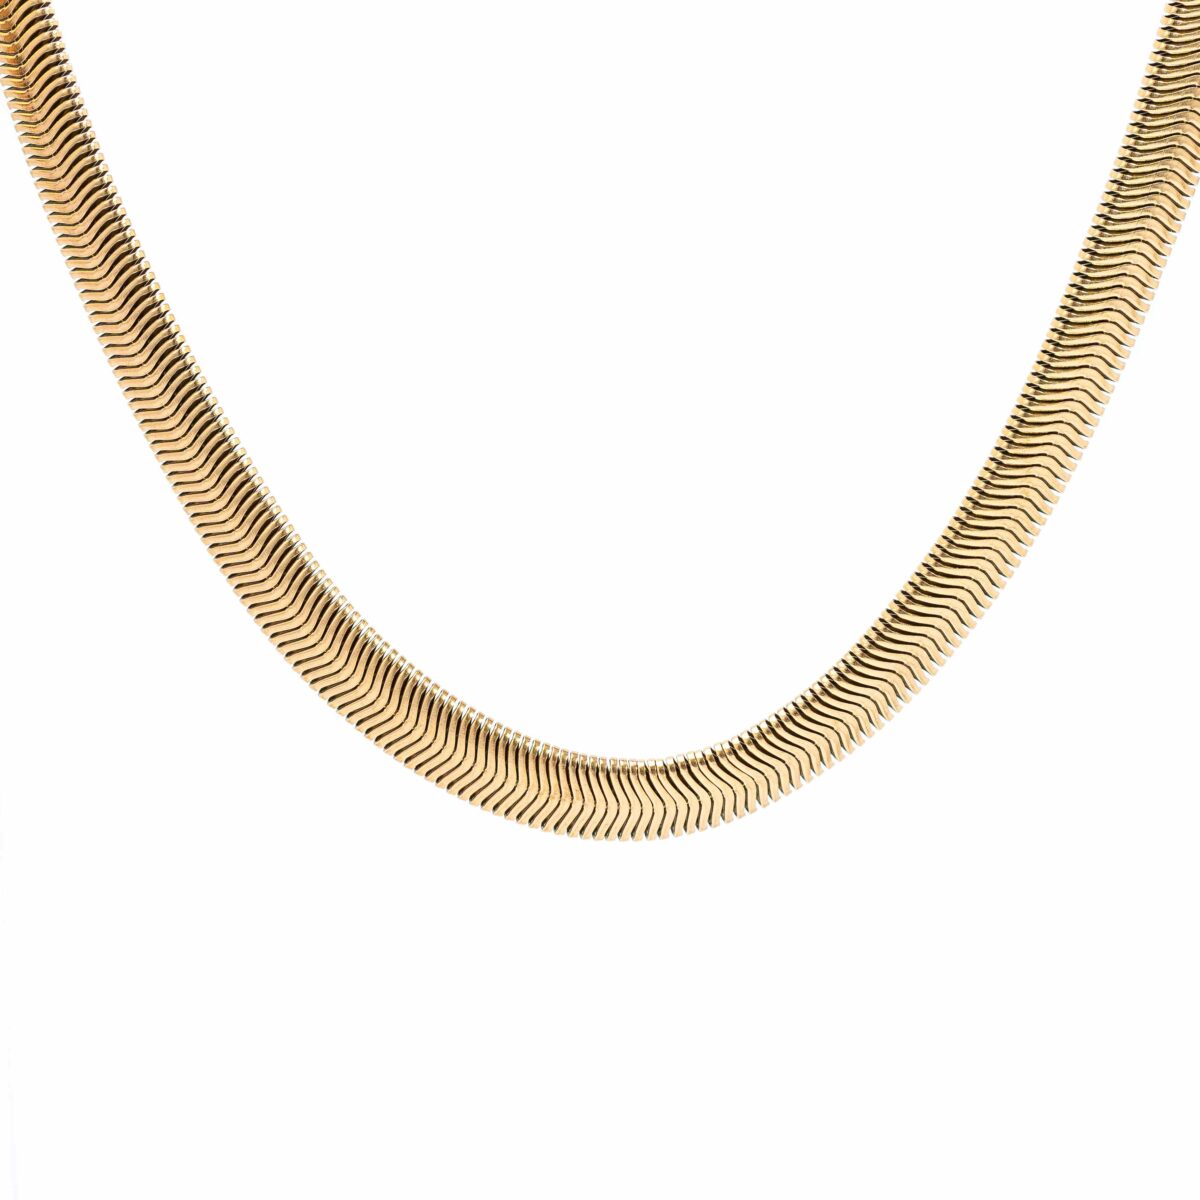 https://m.clubbella.co/product/bold-gold-herringbone-necklace/ Resized (8 of 134)